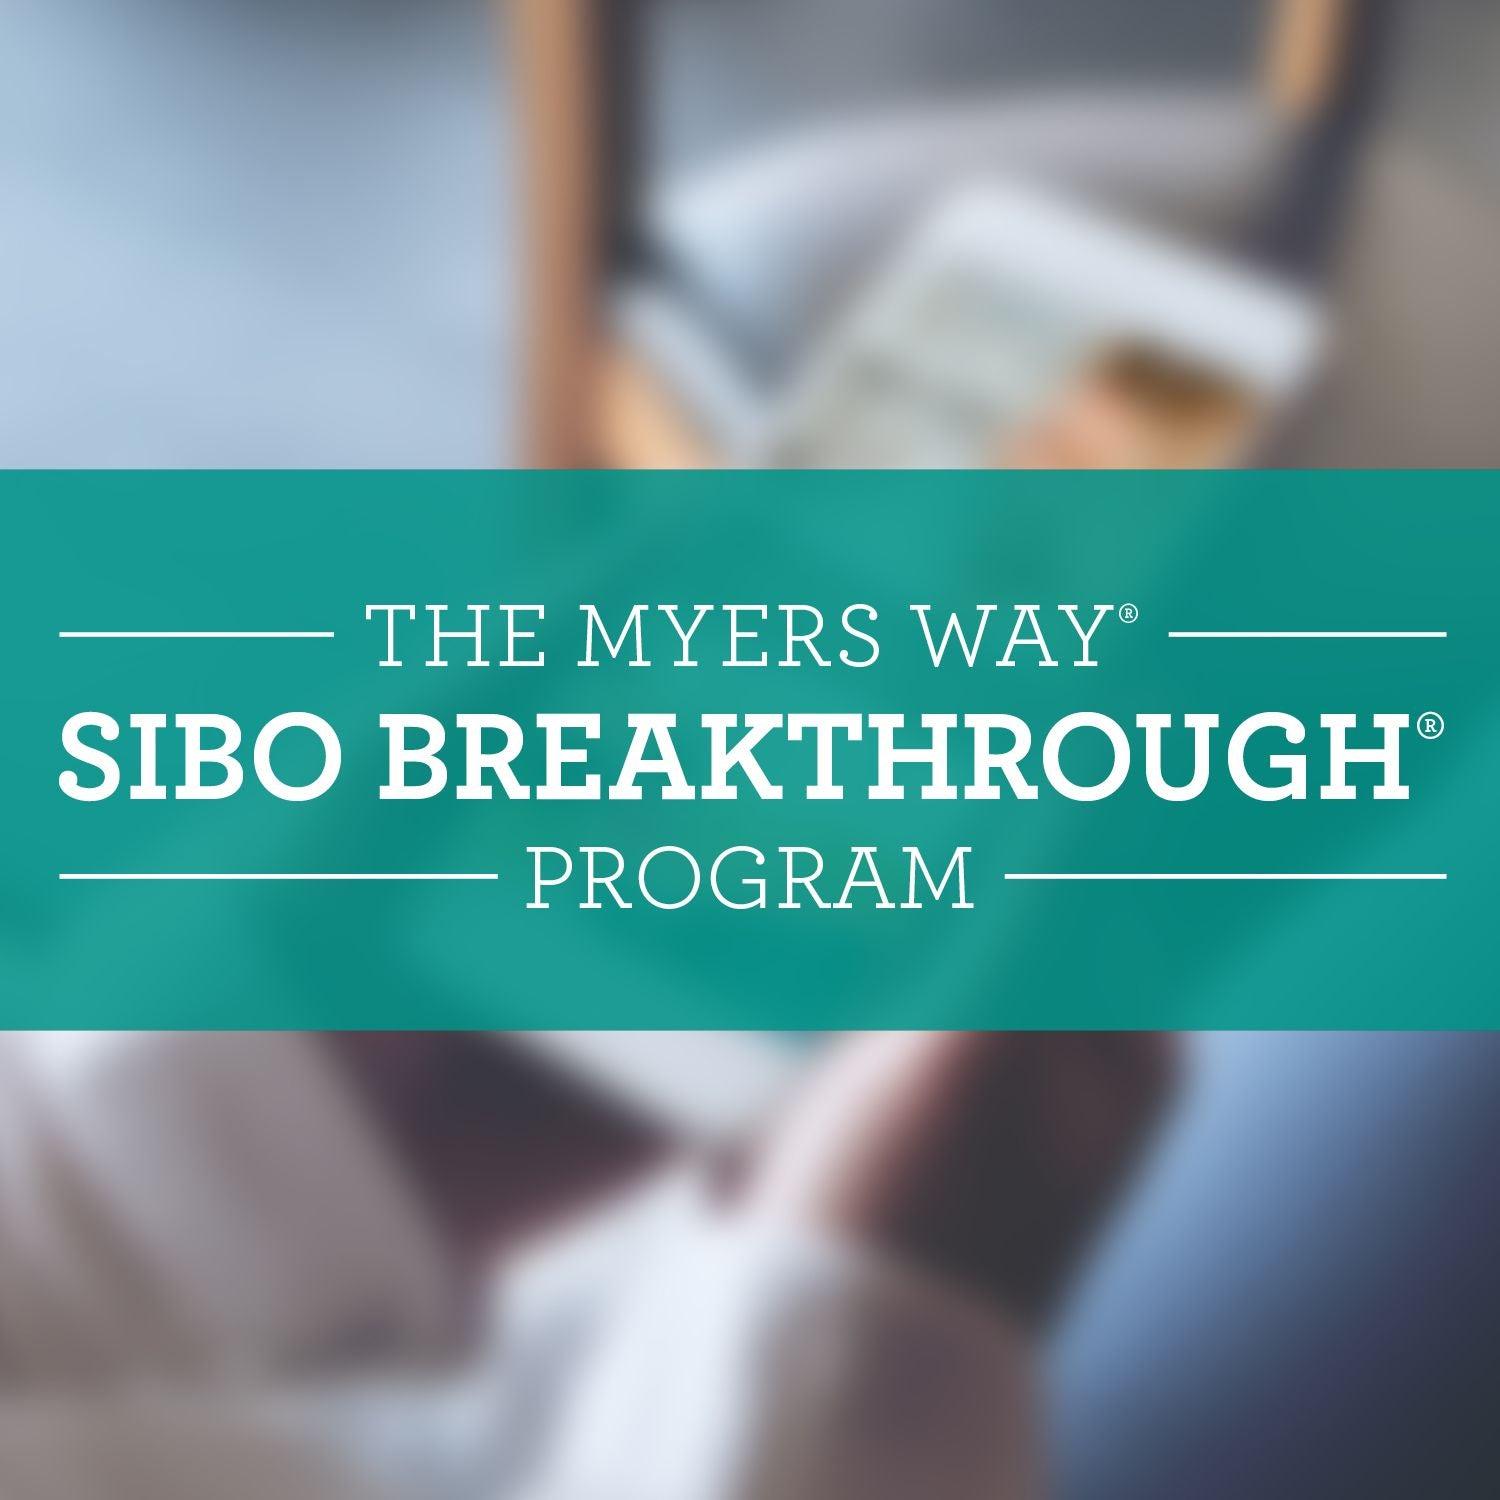 SIBO Breakthrough Program - Featured Image - Amy Myers MD®